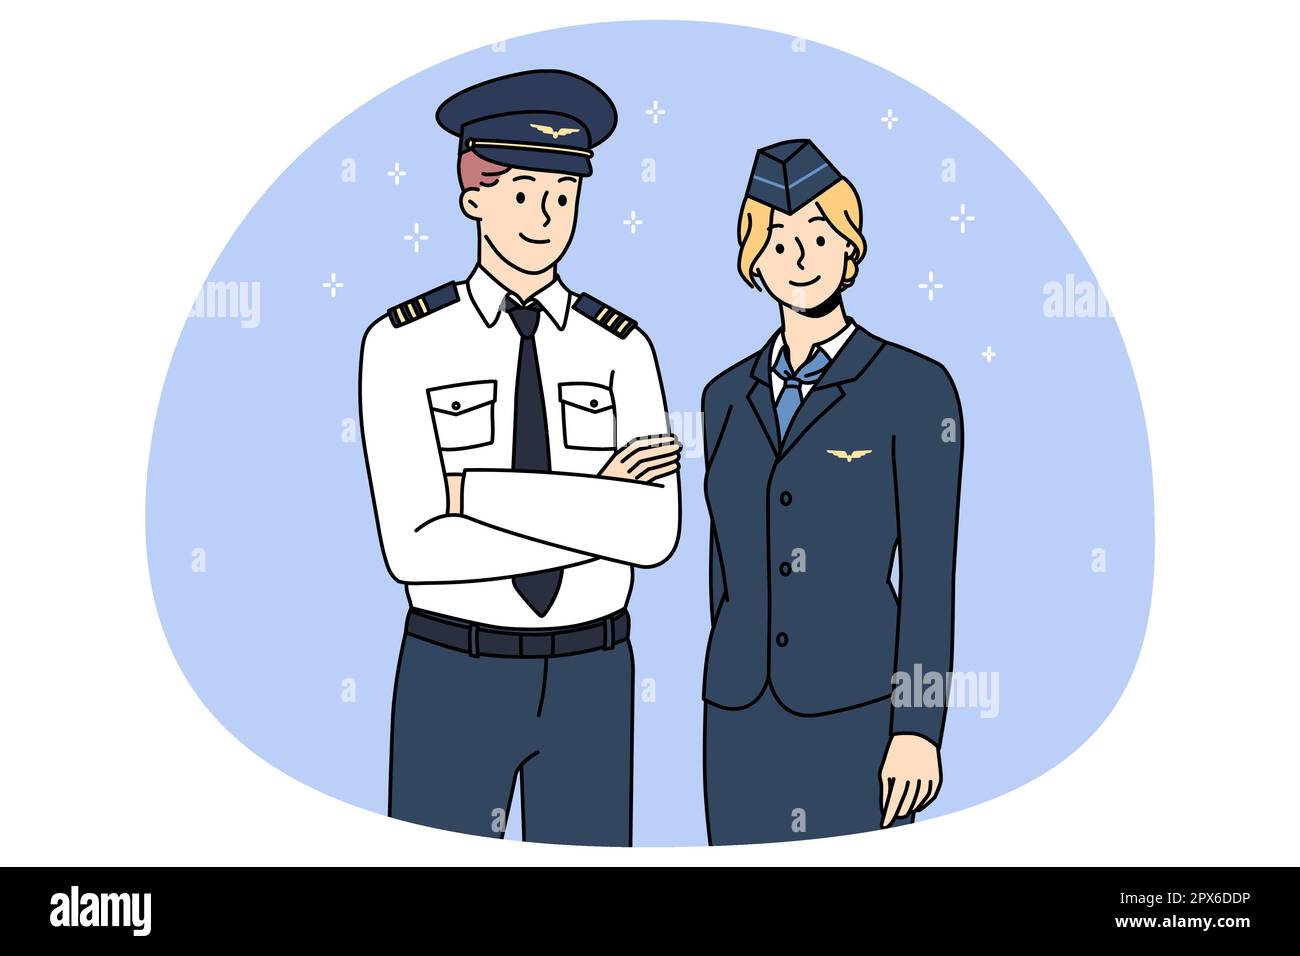 Professional airplane crew in uniform posing for picture together. Portrait of aircraft pilot and stewardess show good quality service. International or national airlines. Vector illustration. Stock Vector